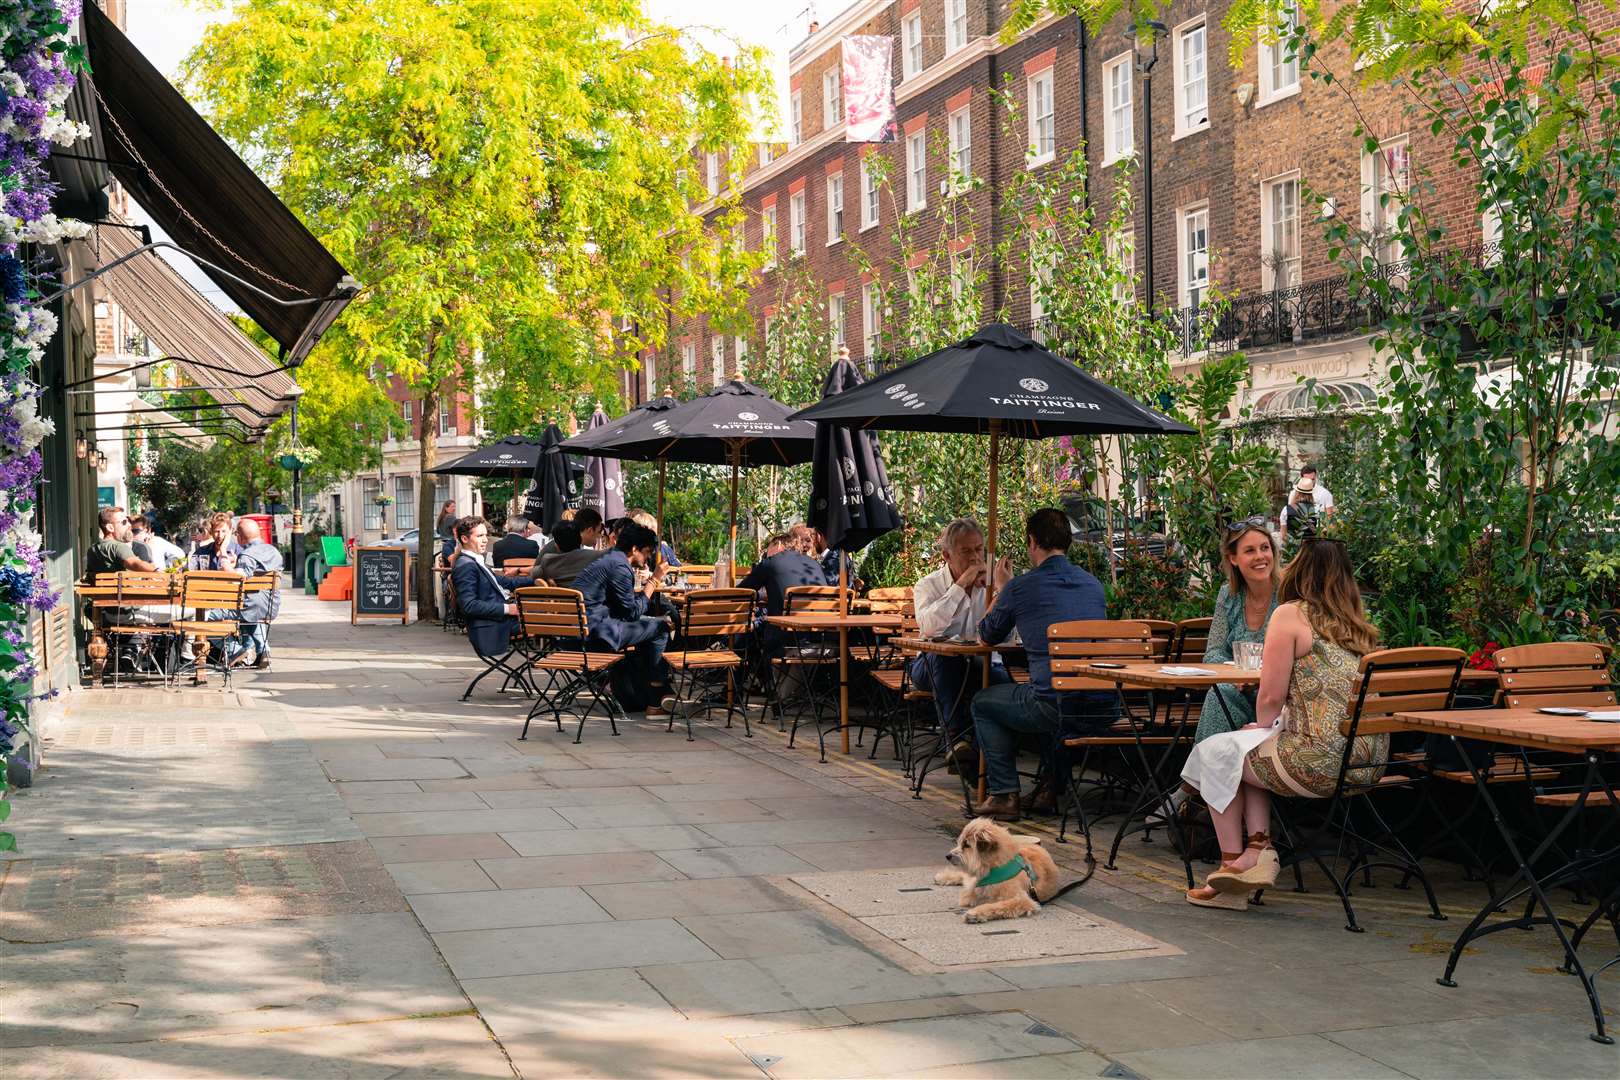 Alfresco dining rules - with or without a dog - in Belgravia